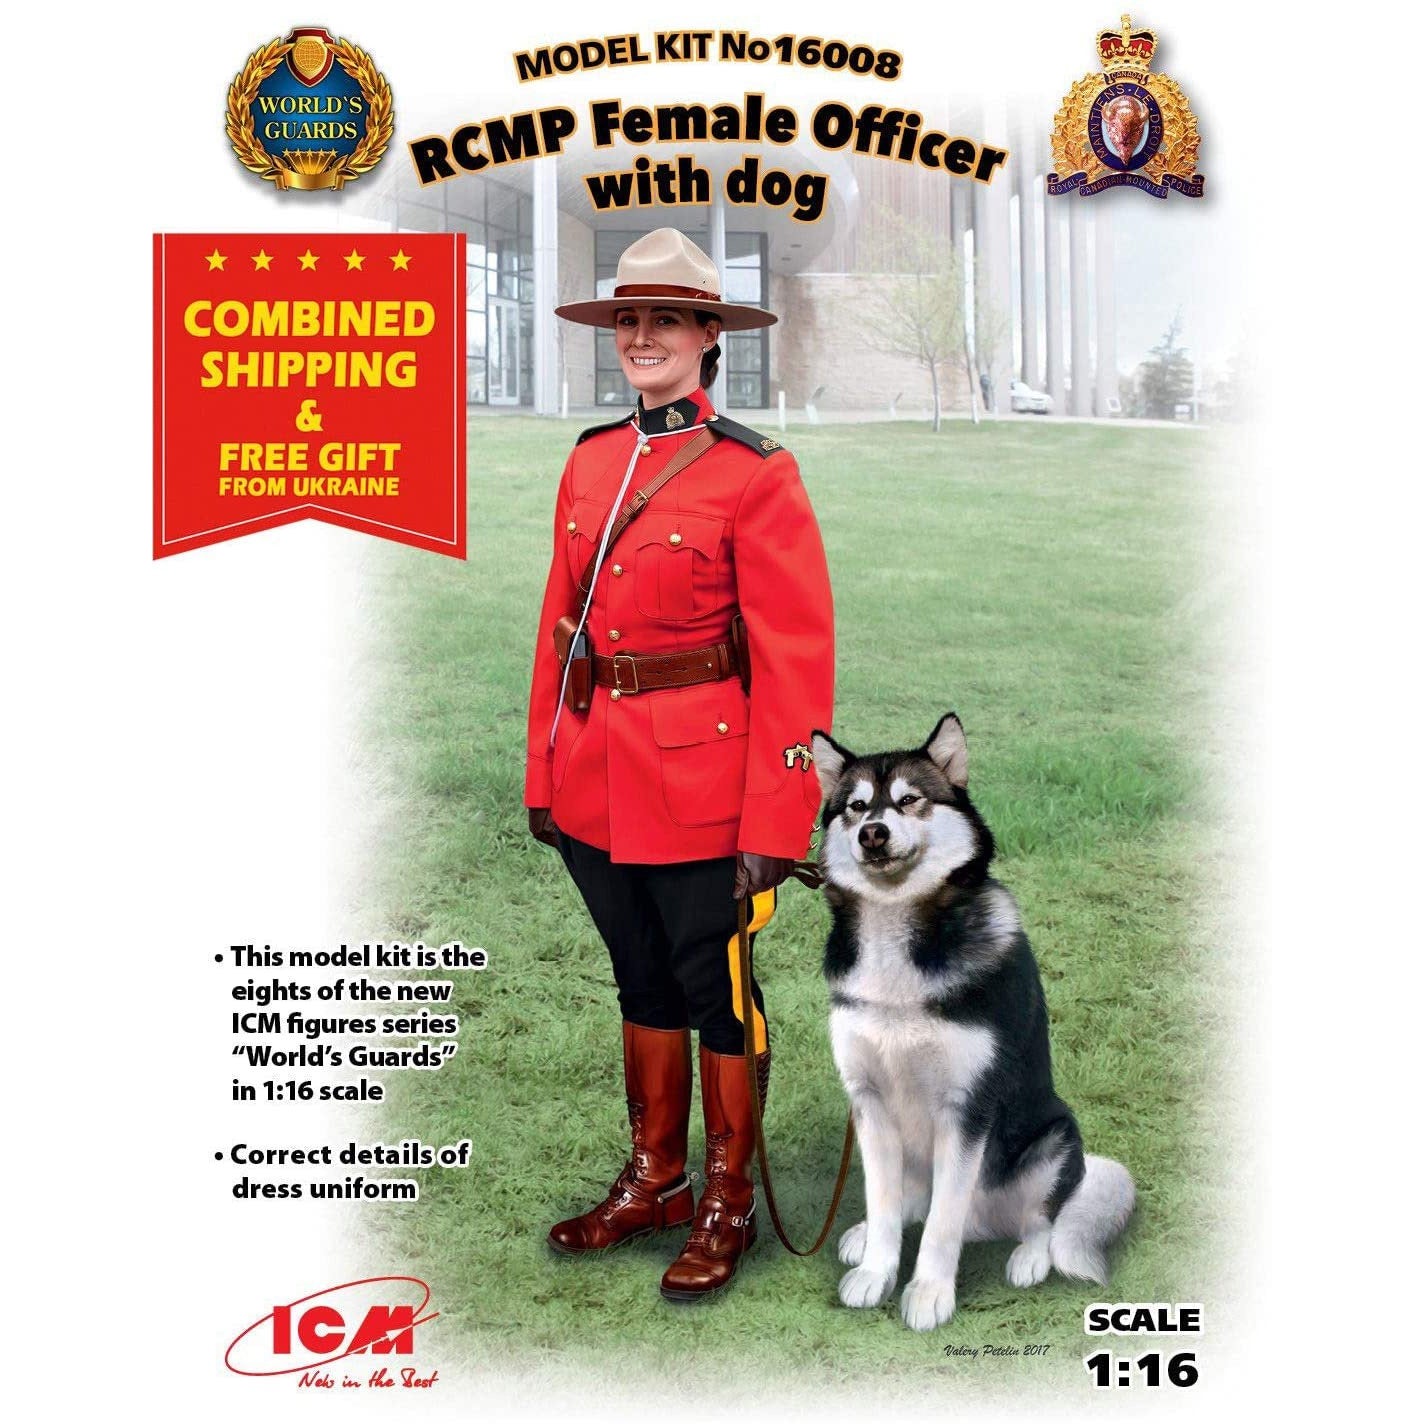 RCMP Female Officer with Dog ICM-16008 1/16 by ICM